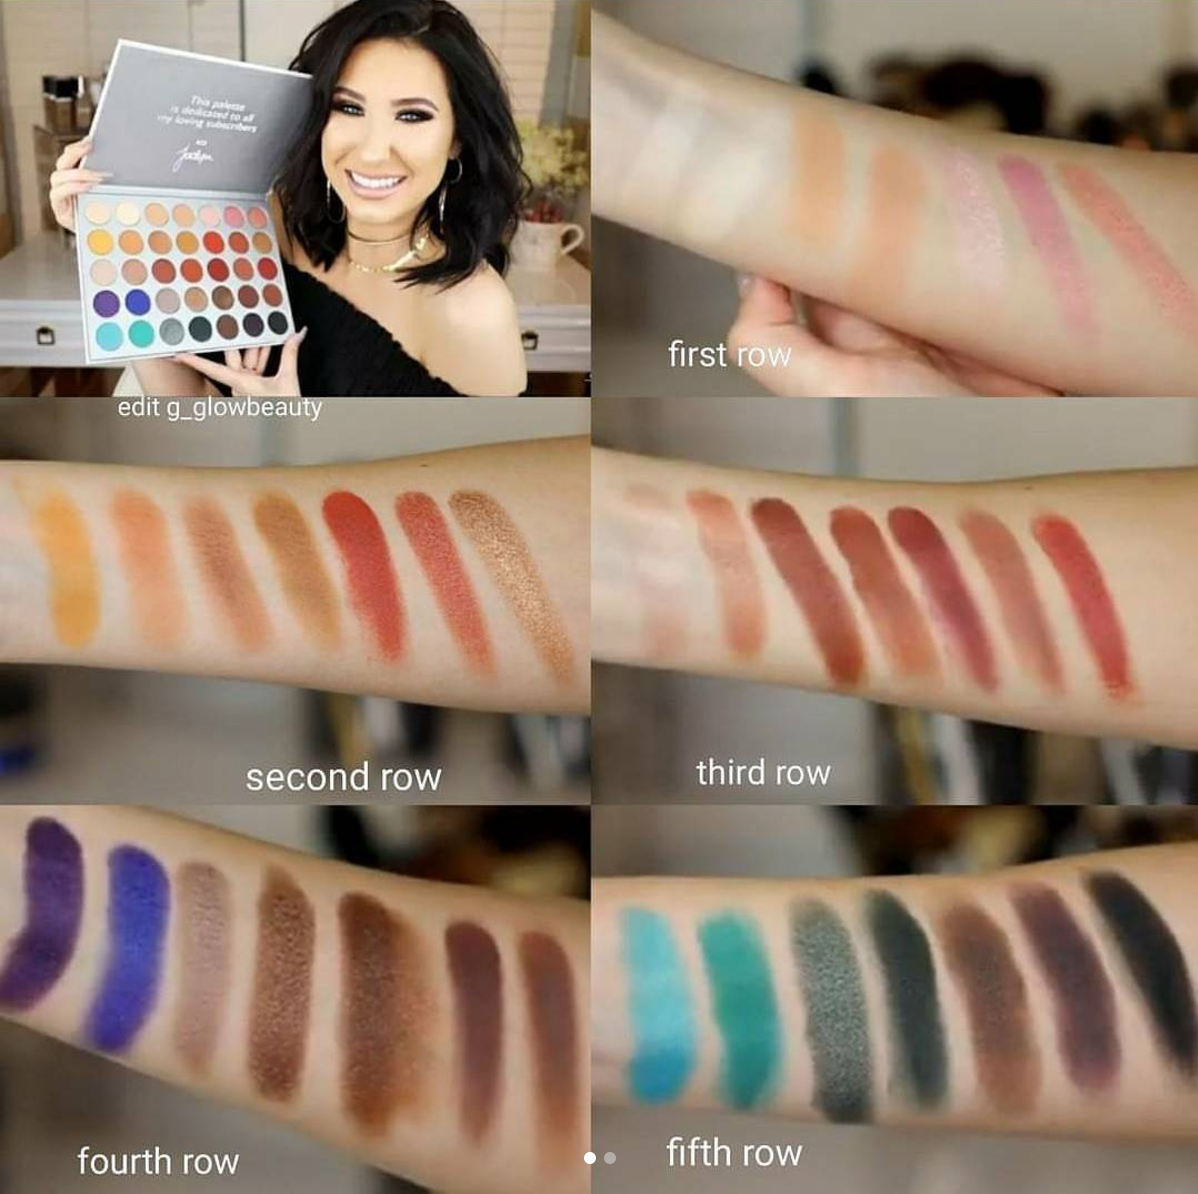 Morphe x Jaclyn Hill Eyeshadow Palette Swatches